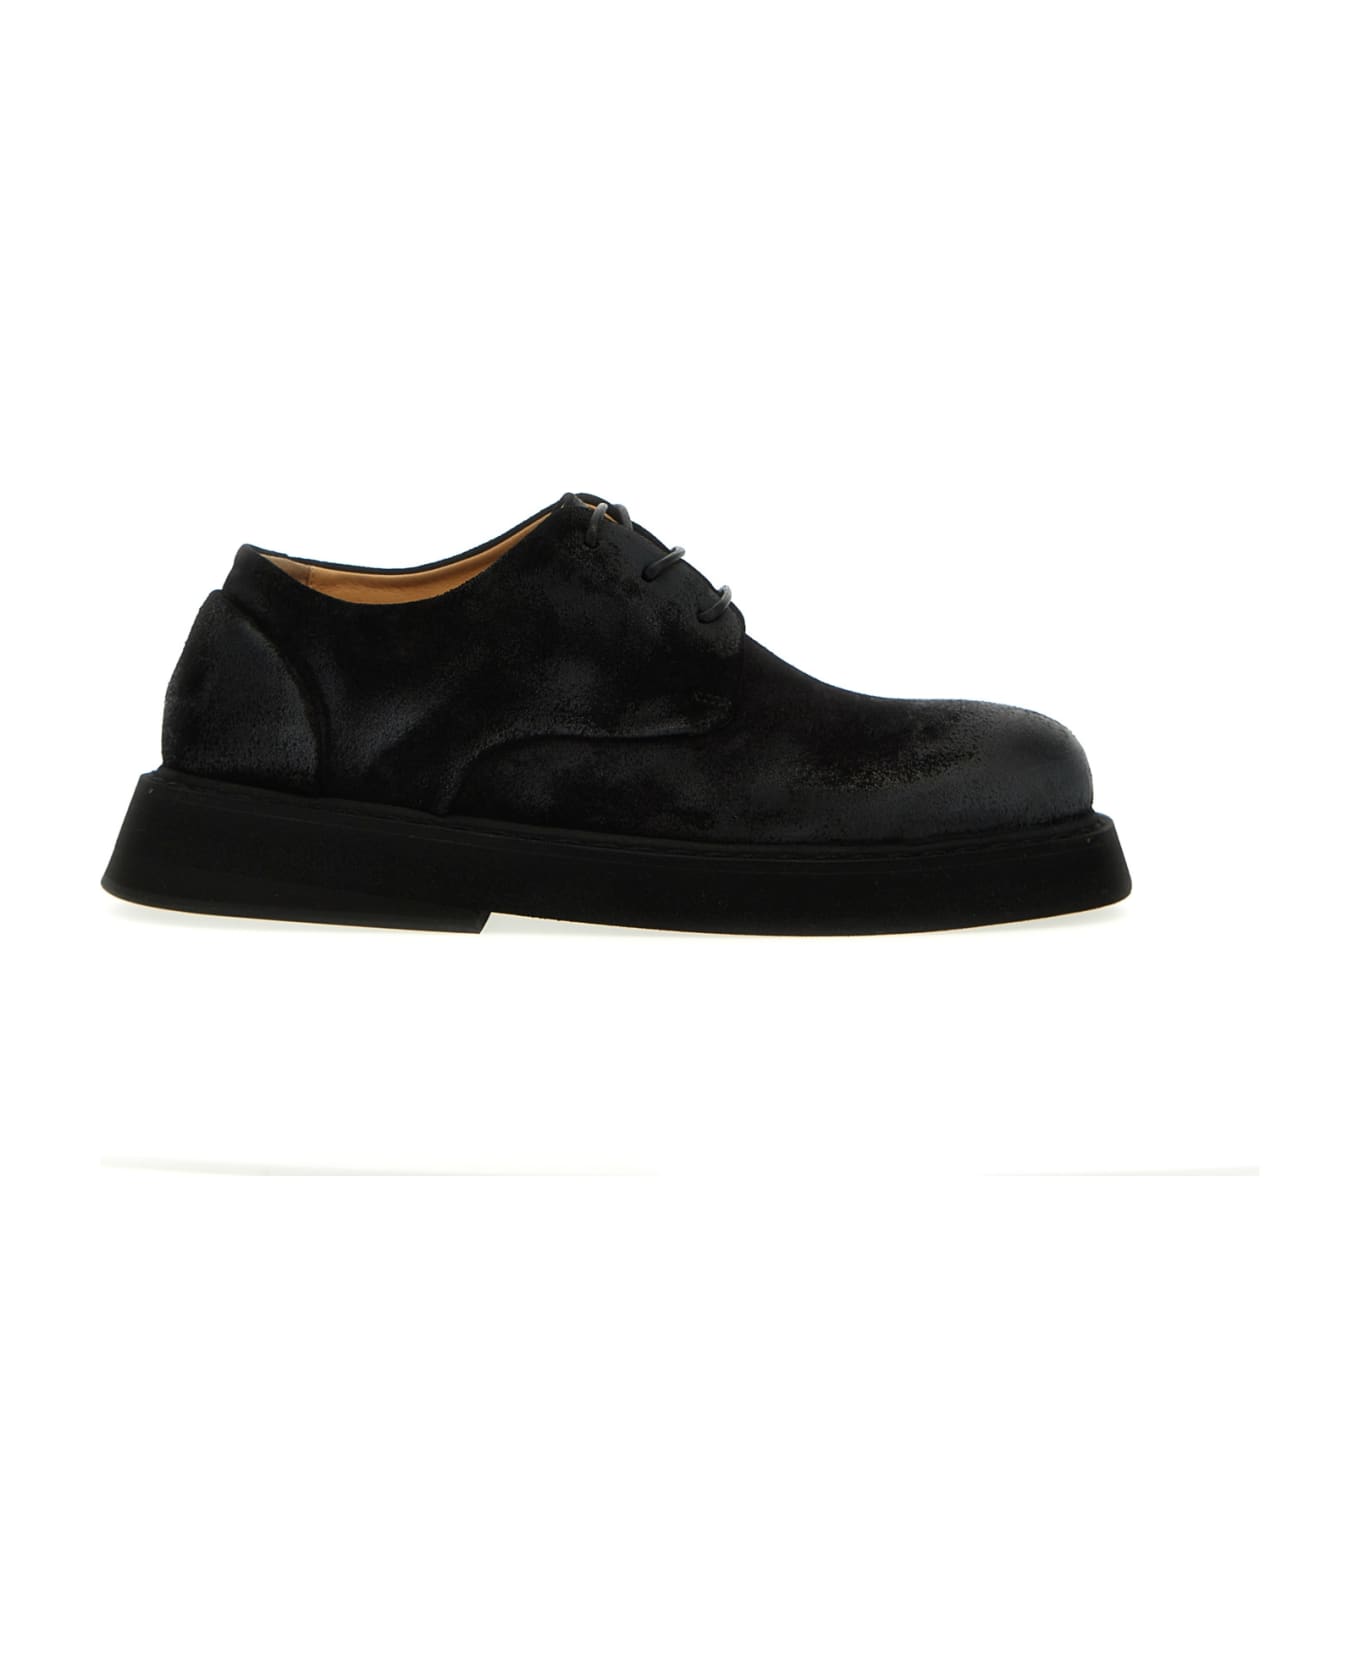 Marsell 'spalla' Lace Up Shoes - Black   ローファー＆デッキシューズ